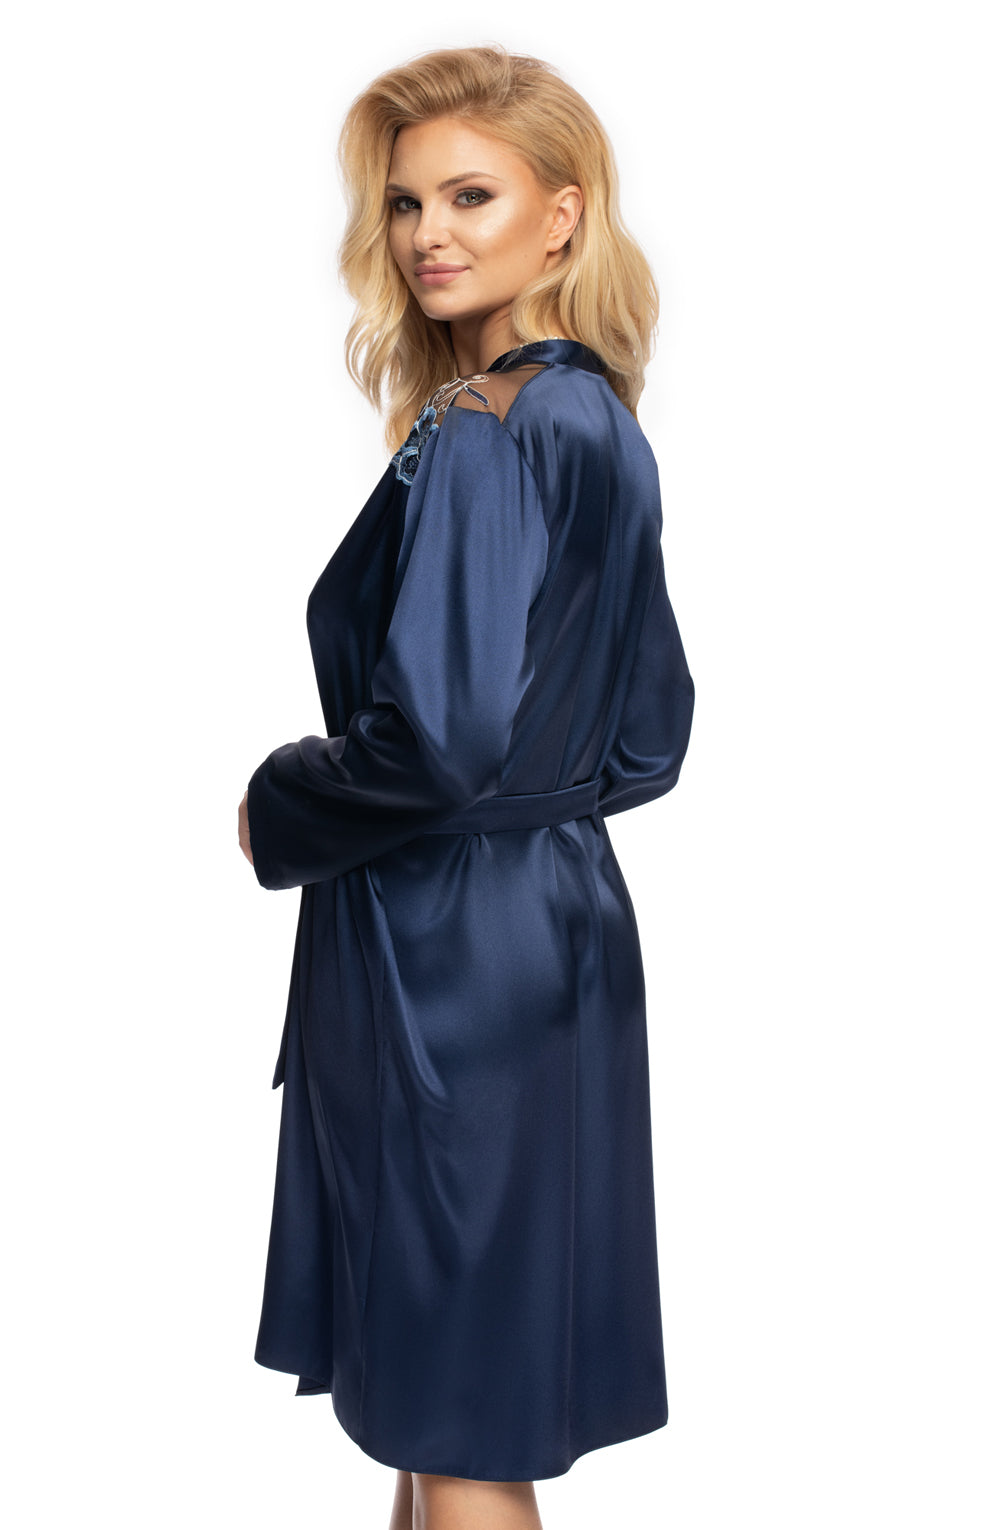 Irall Elodie Dressing Gown Navy - PureDiva